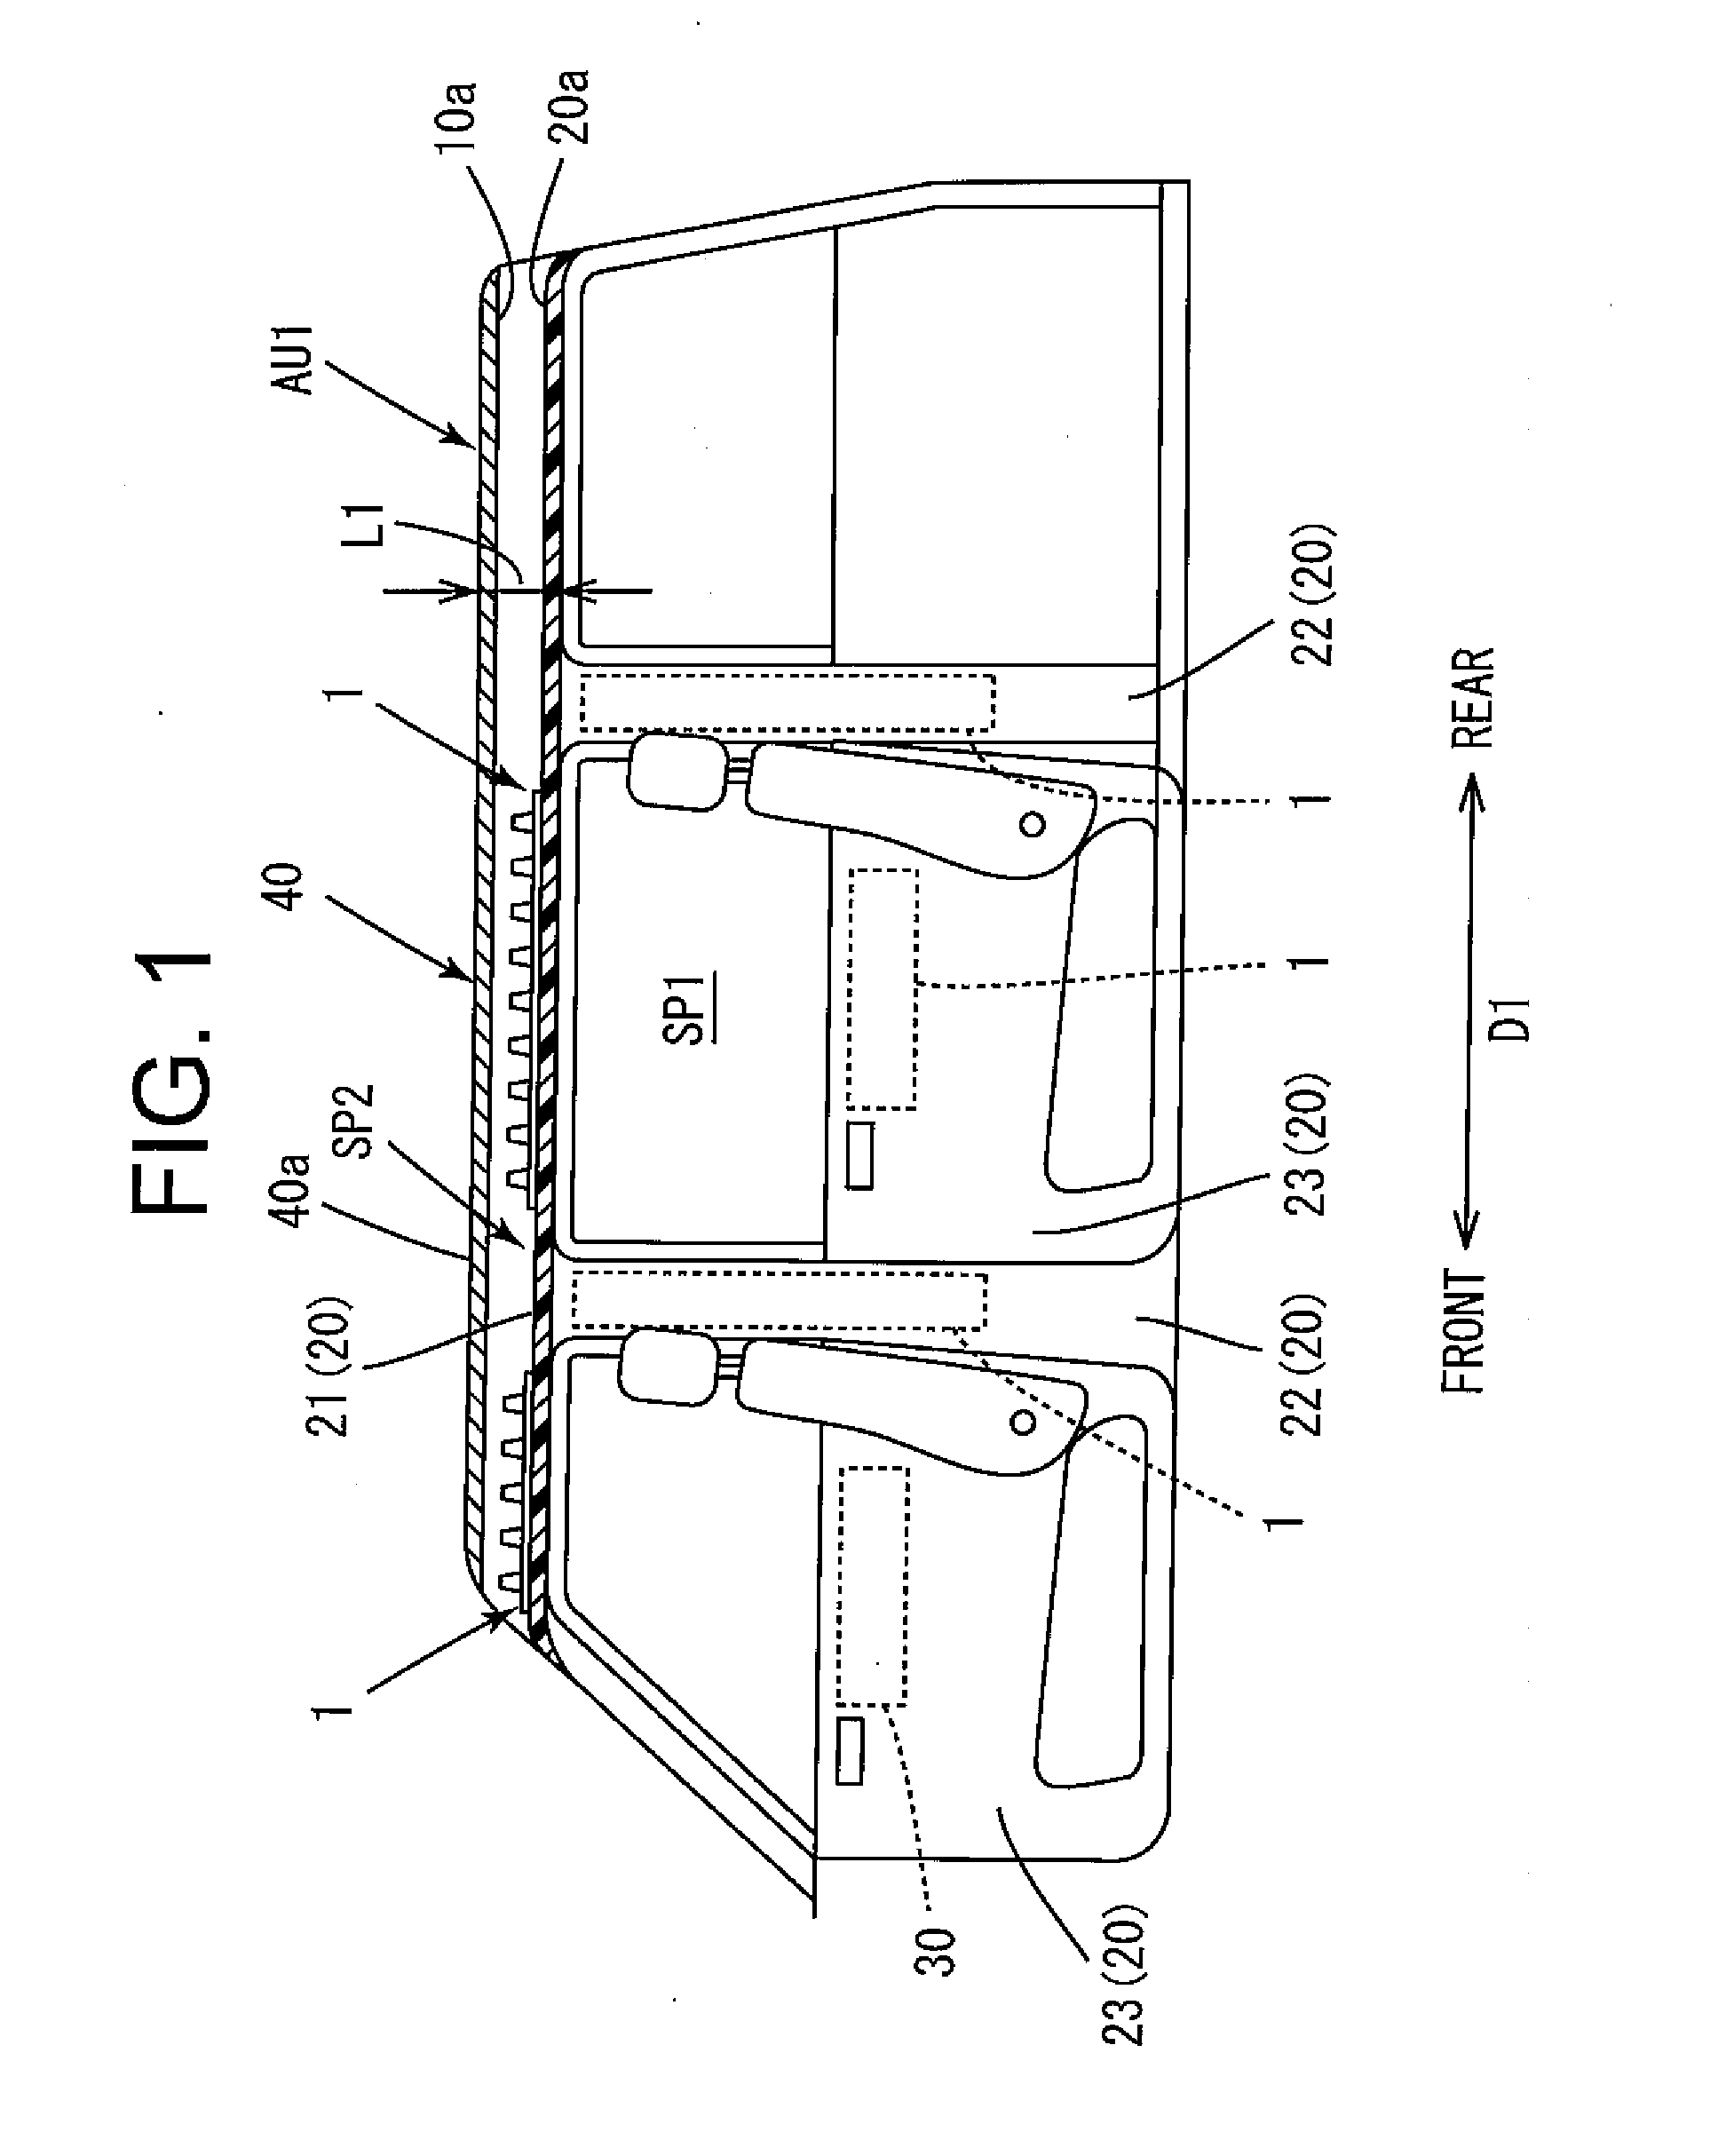 Shock absorption structure for vehicle